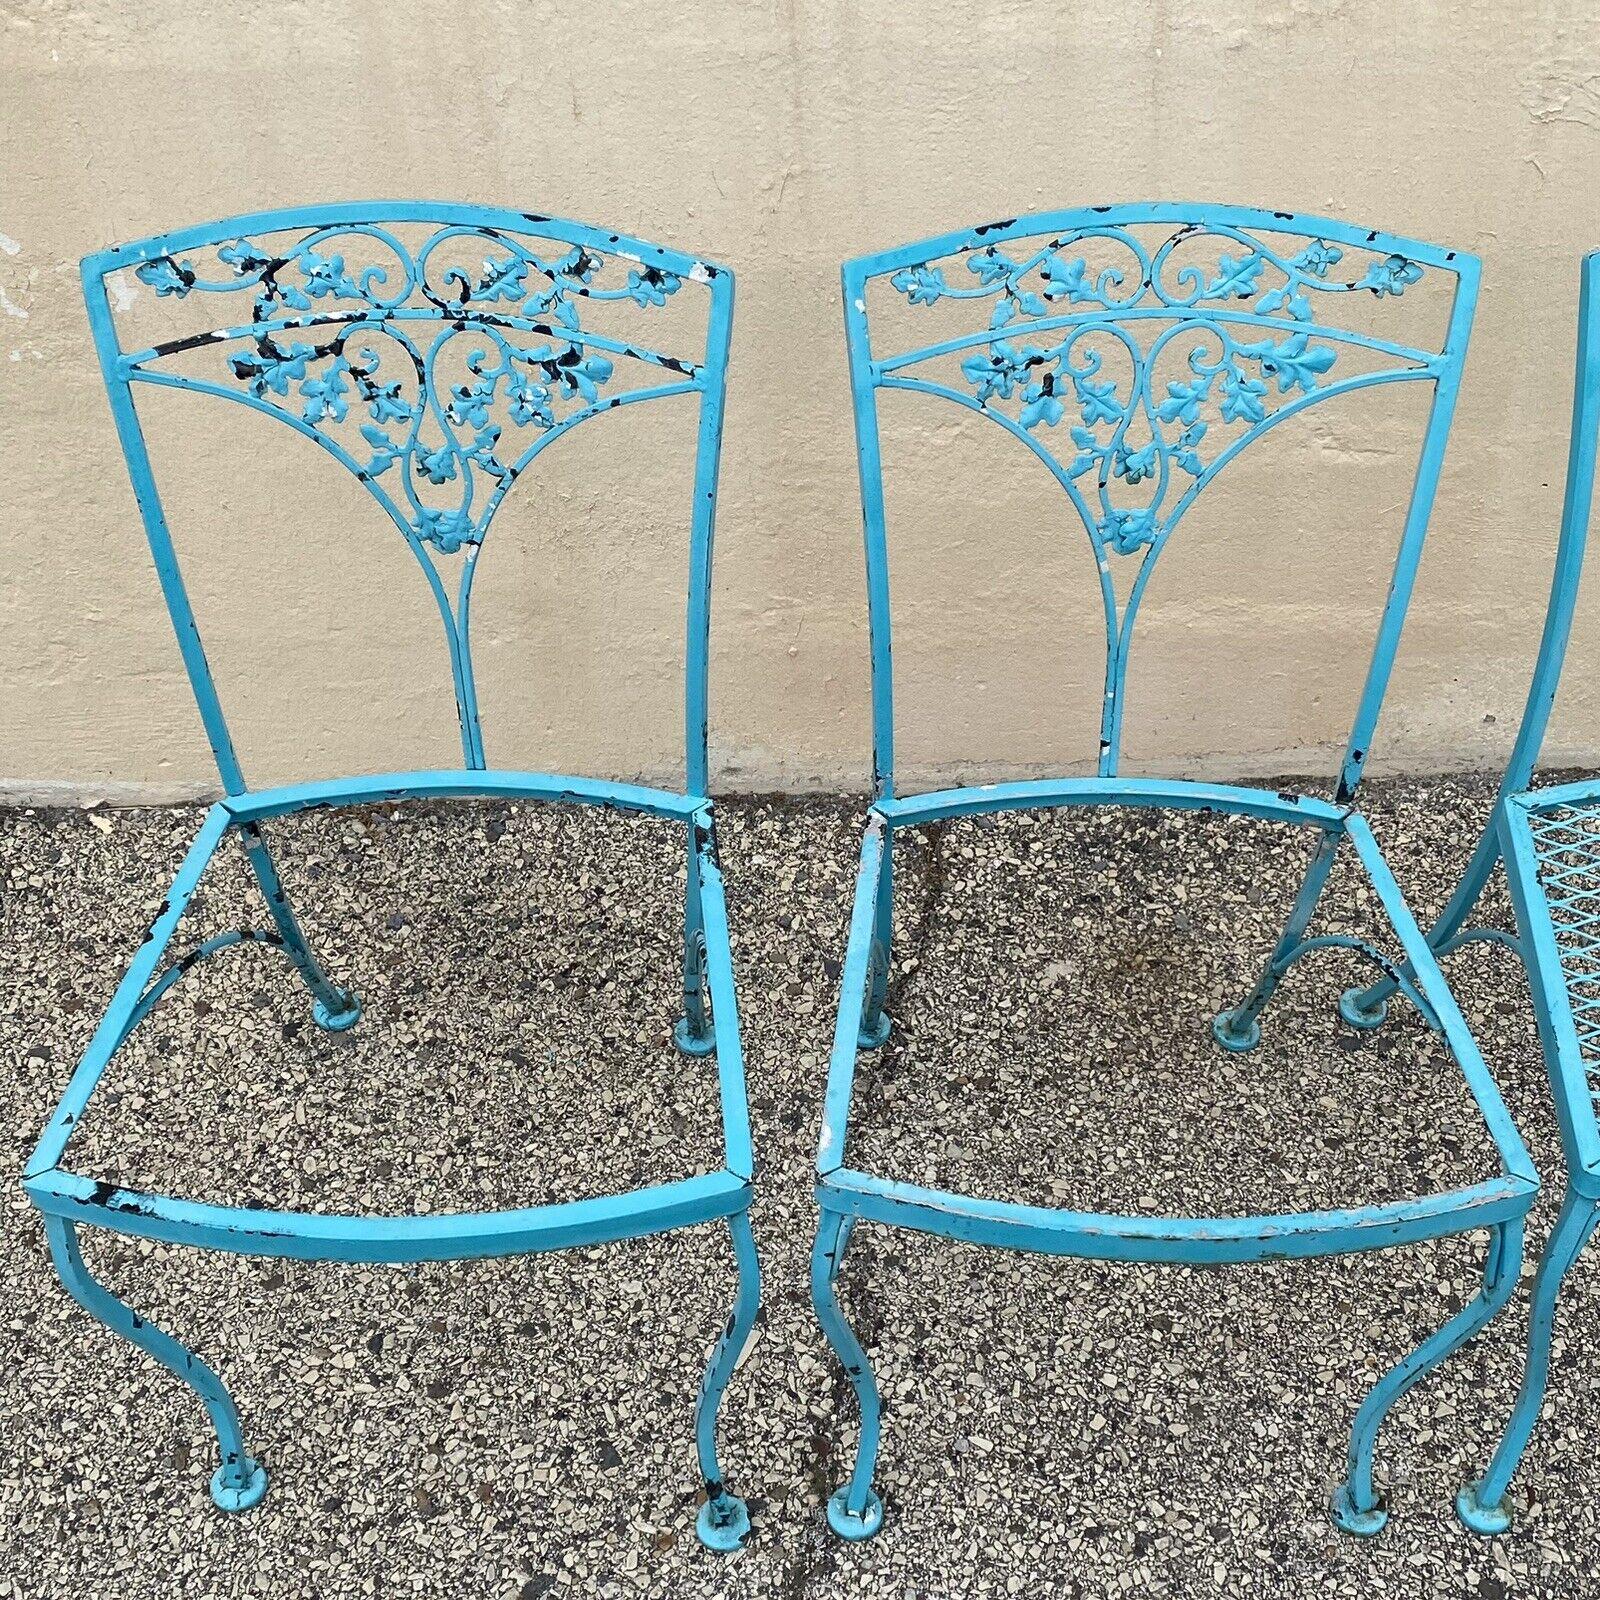 Vintage Woodard Orleans Pattern Wrought Iron Garden Patio Dining Chairs Set of 4 In Good Condition For Sale In Philadelphia, PA